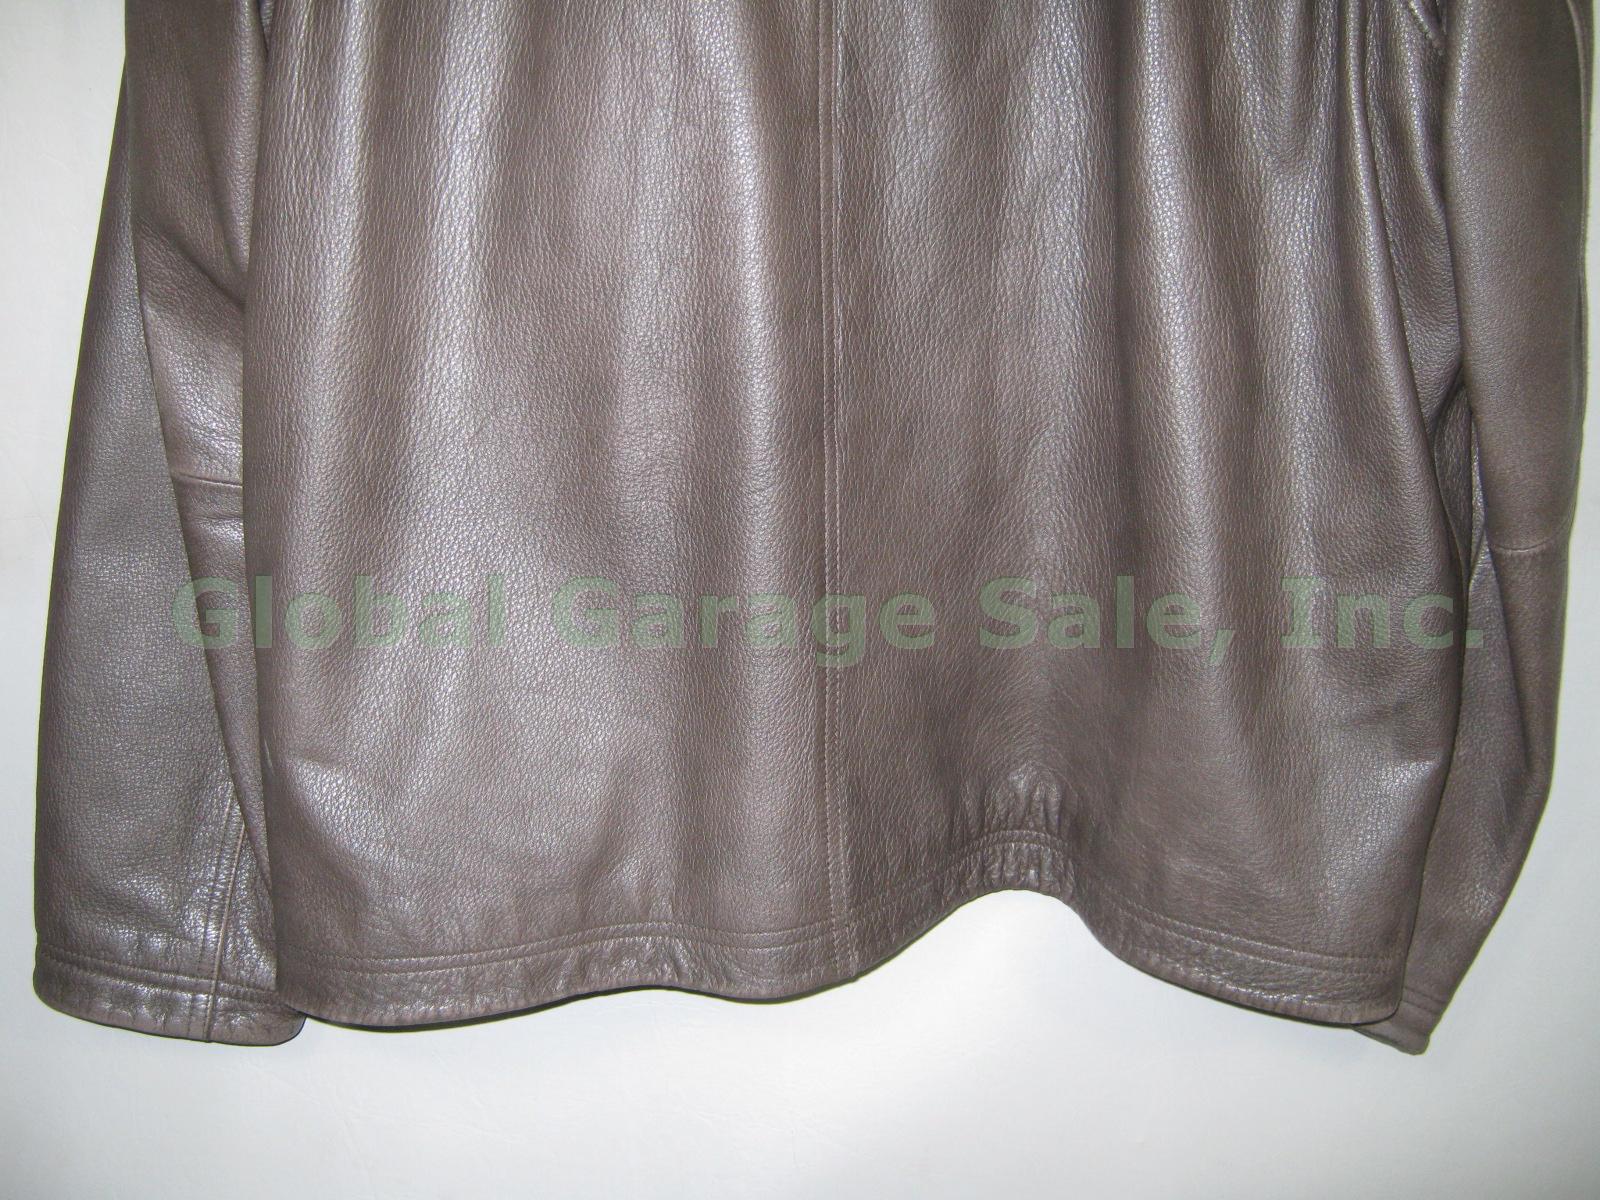 Eddie Bauer Mens Brown Leather Jacket Size Tall XL Extra Large 1 Owner No Reserv 5